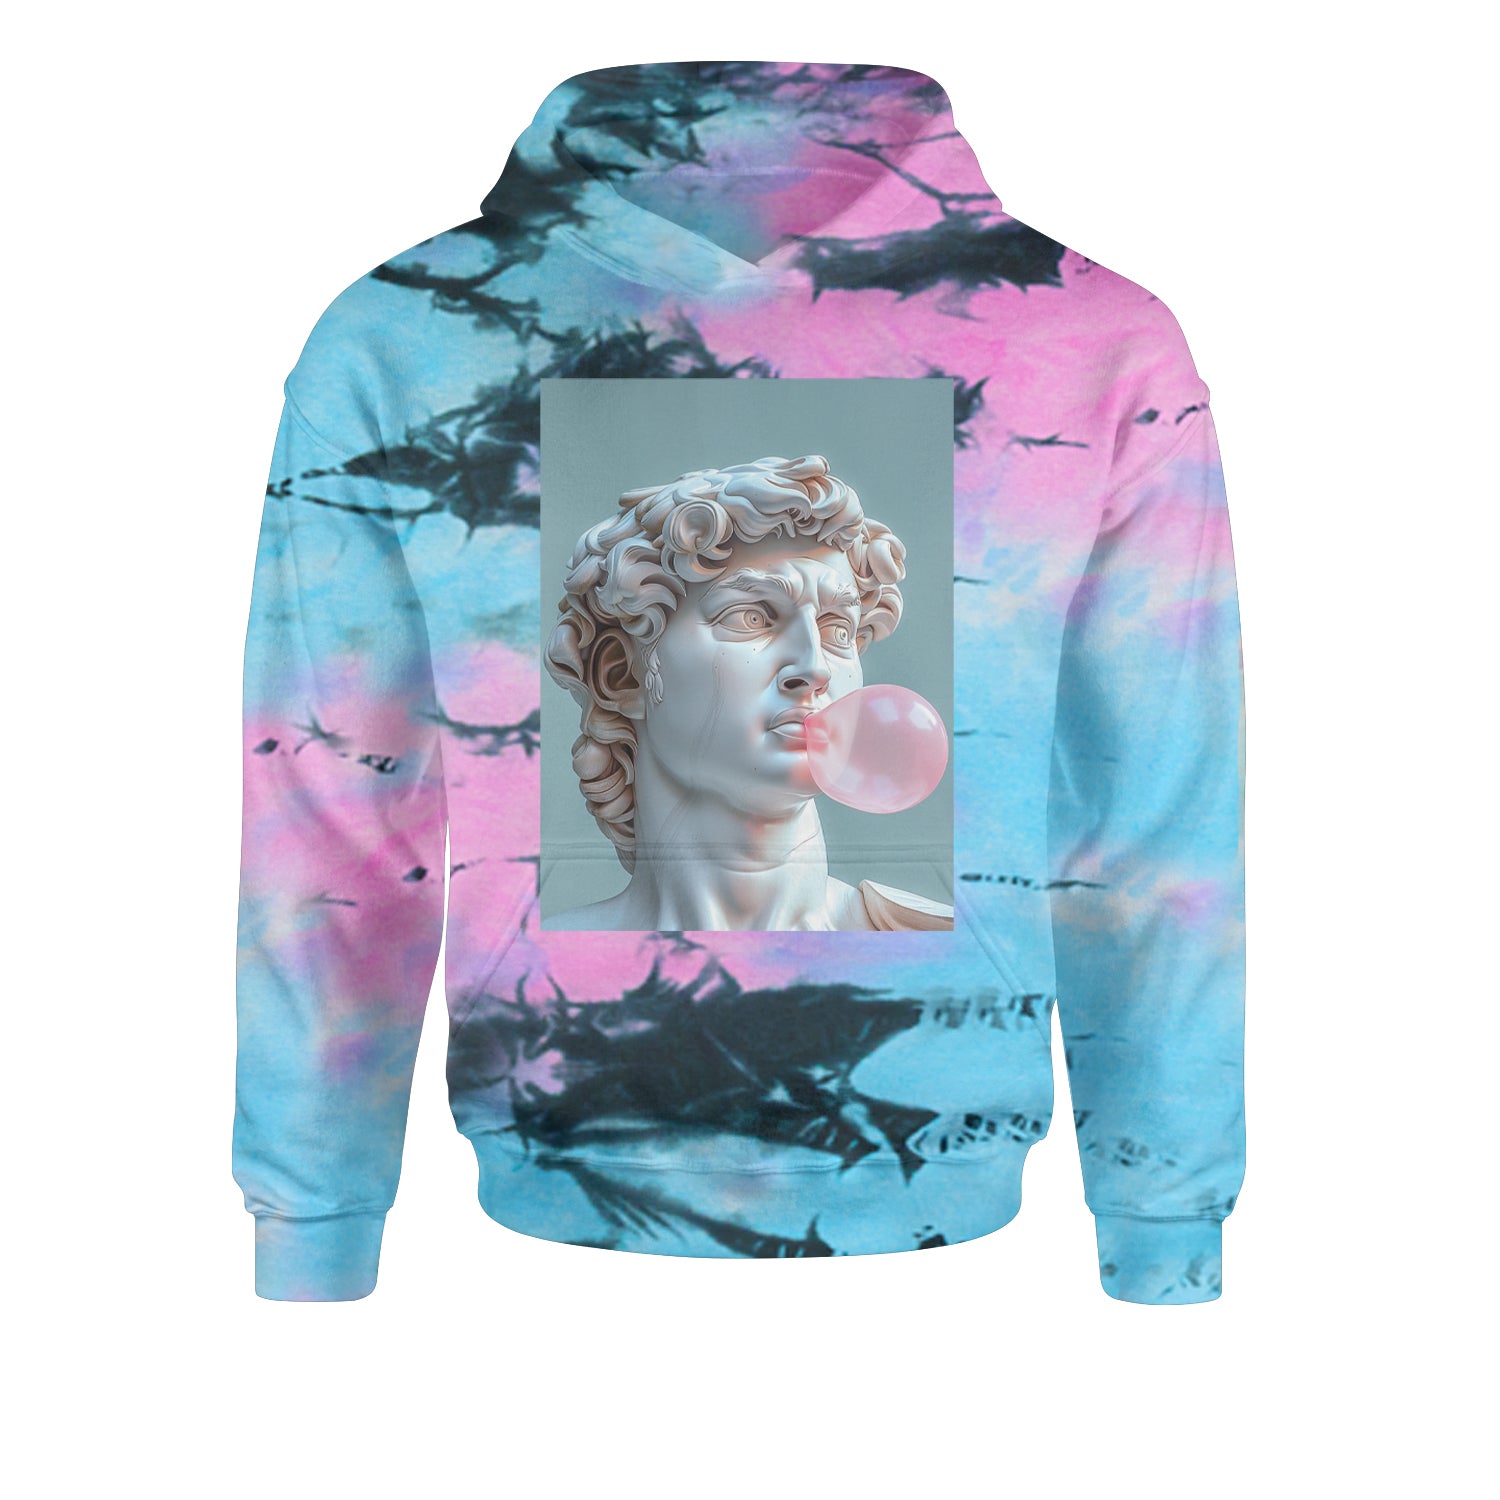 Michelangelo's David with Bubble Gum Contemporary Statue Art Youth-Sized Hoodie Tie-Dye Pacific